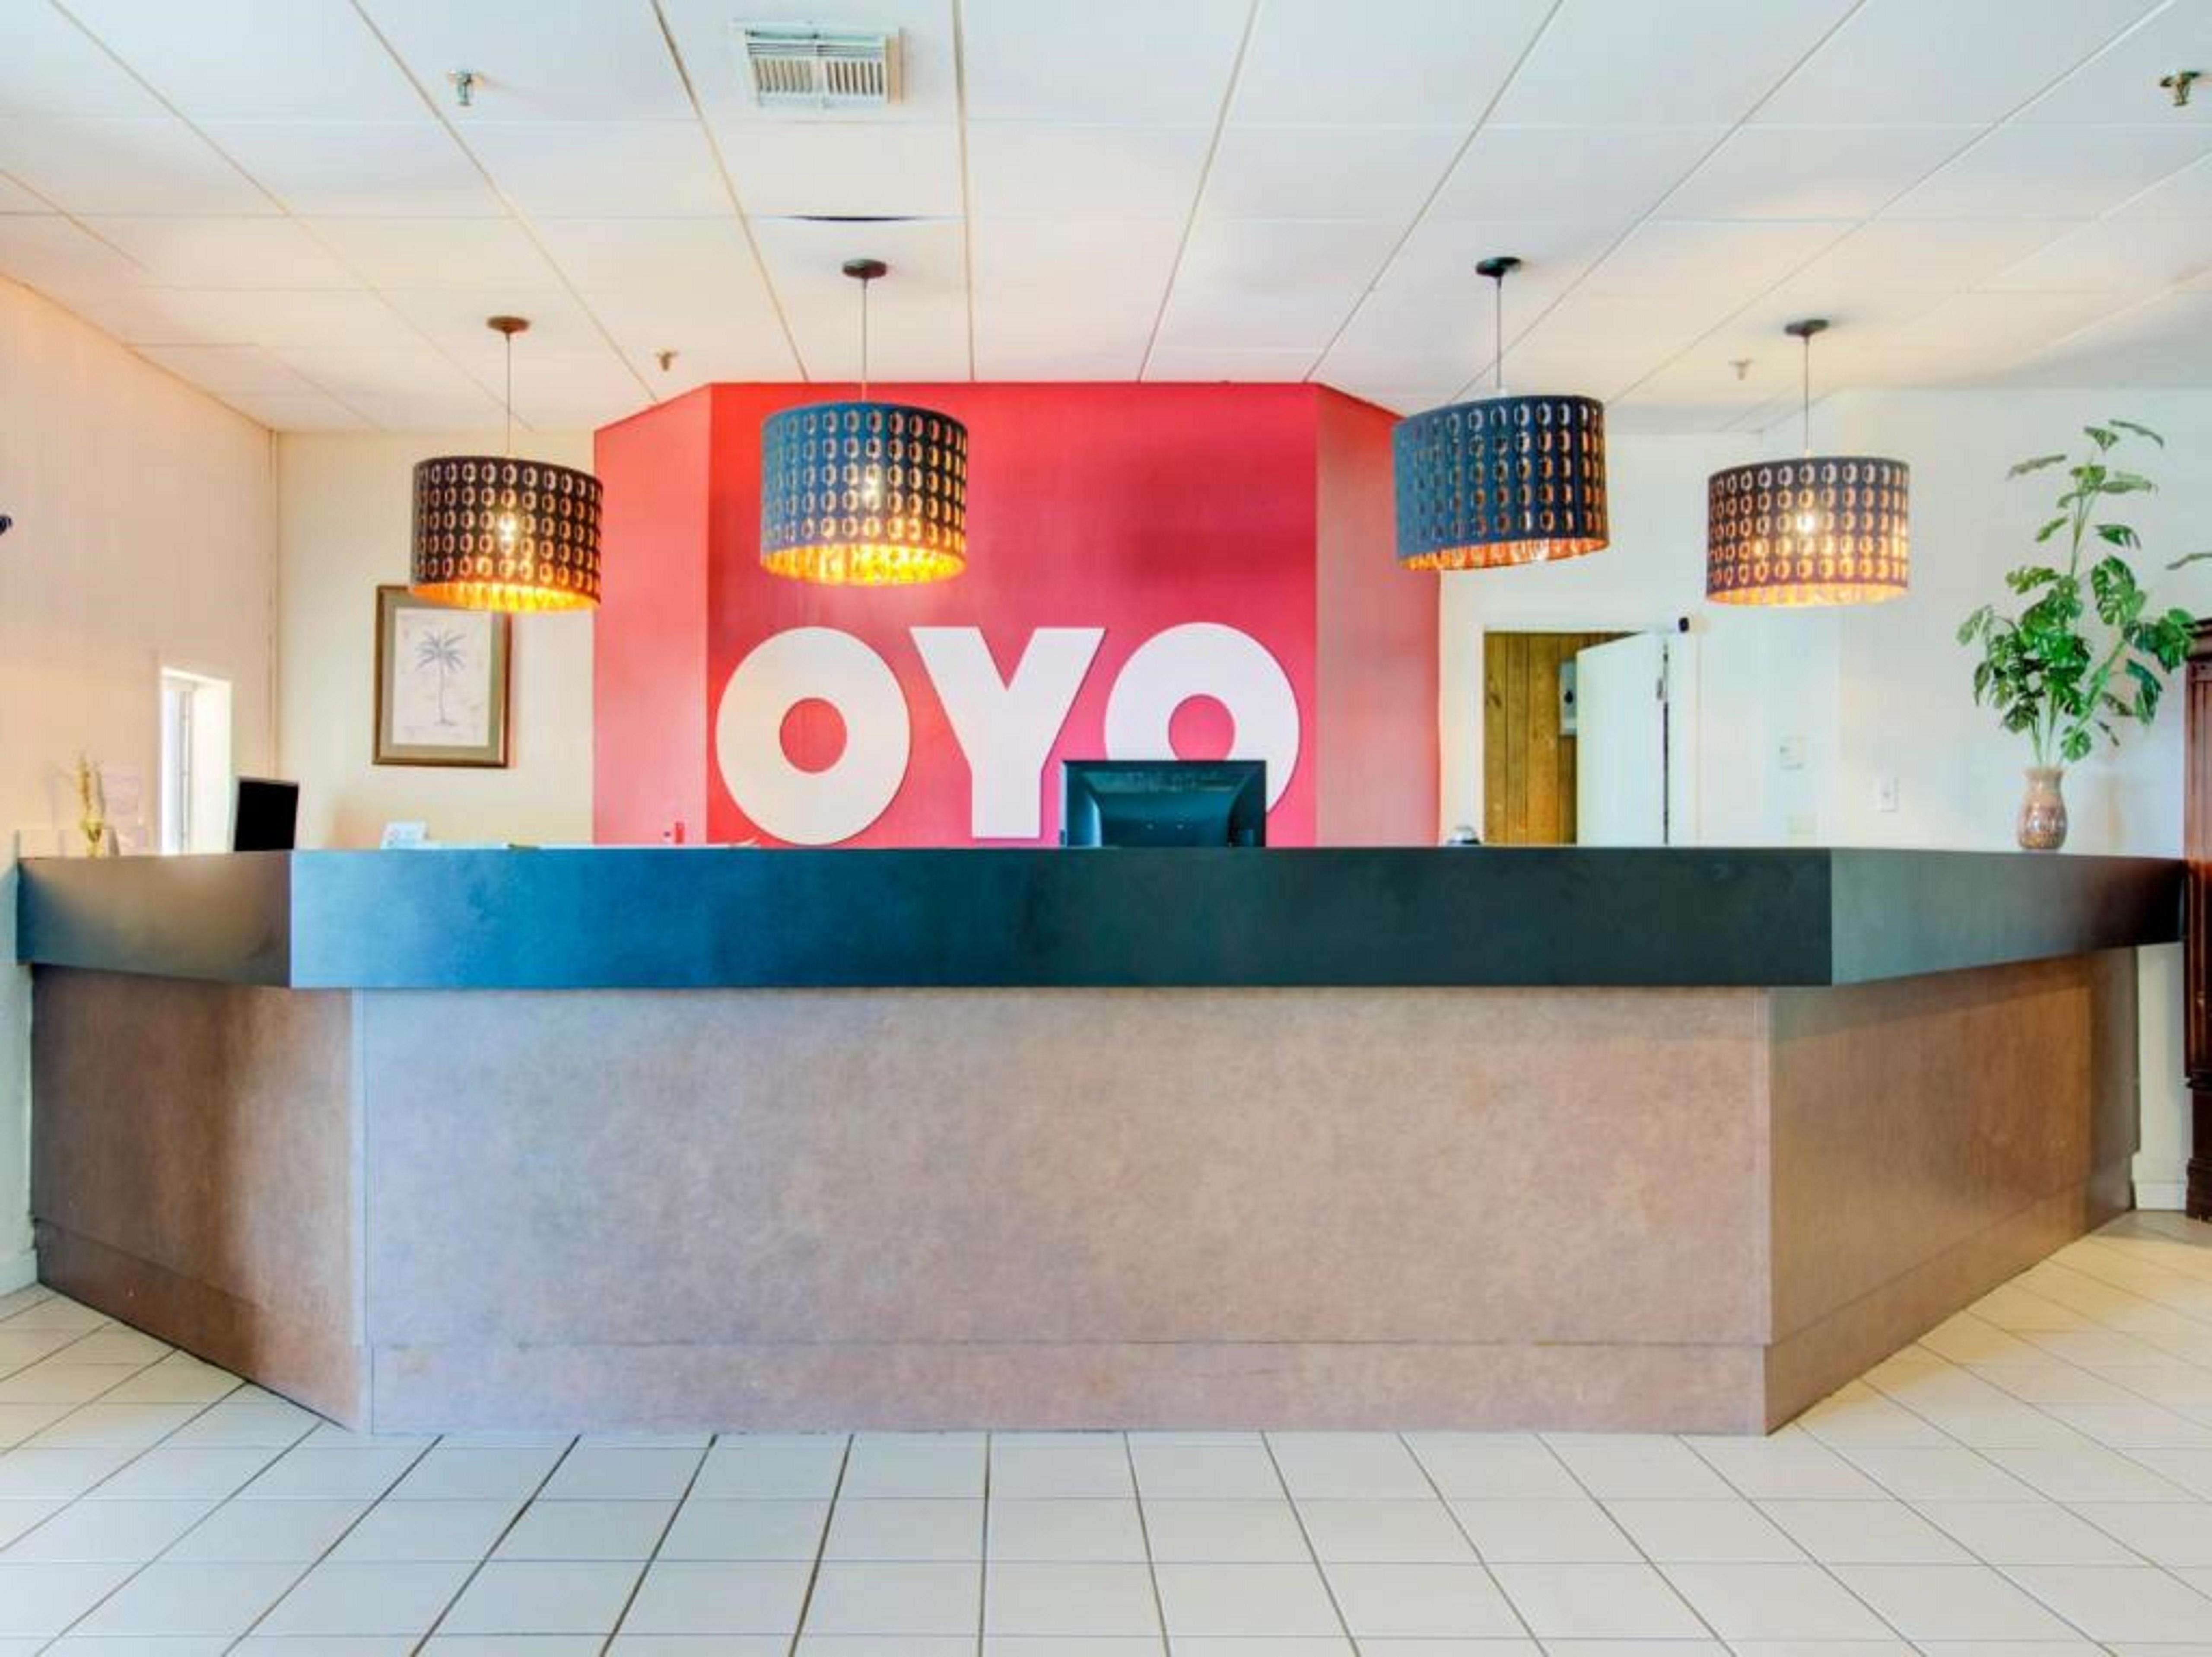 Oyo Hotel Dundee By Crystal Lake Exterior photo